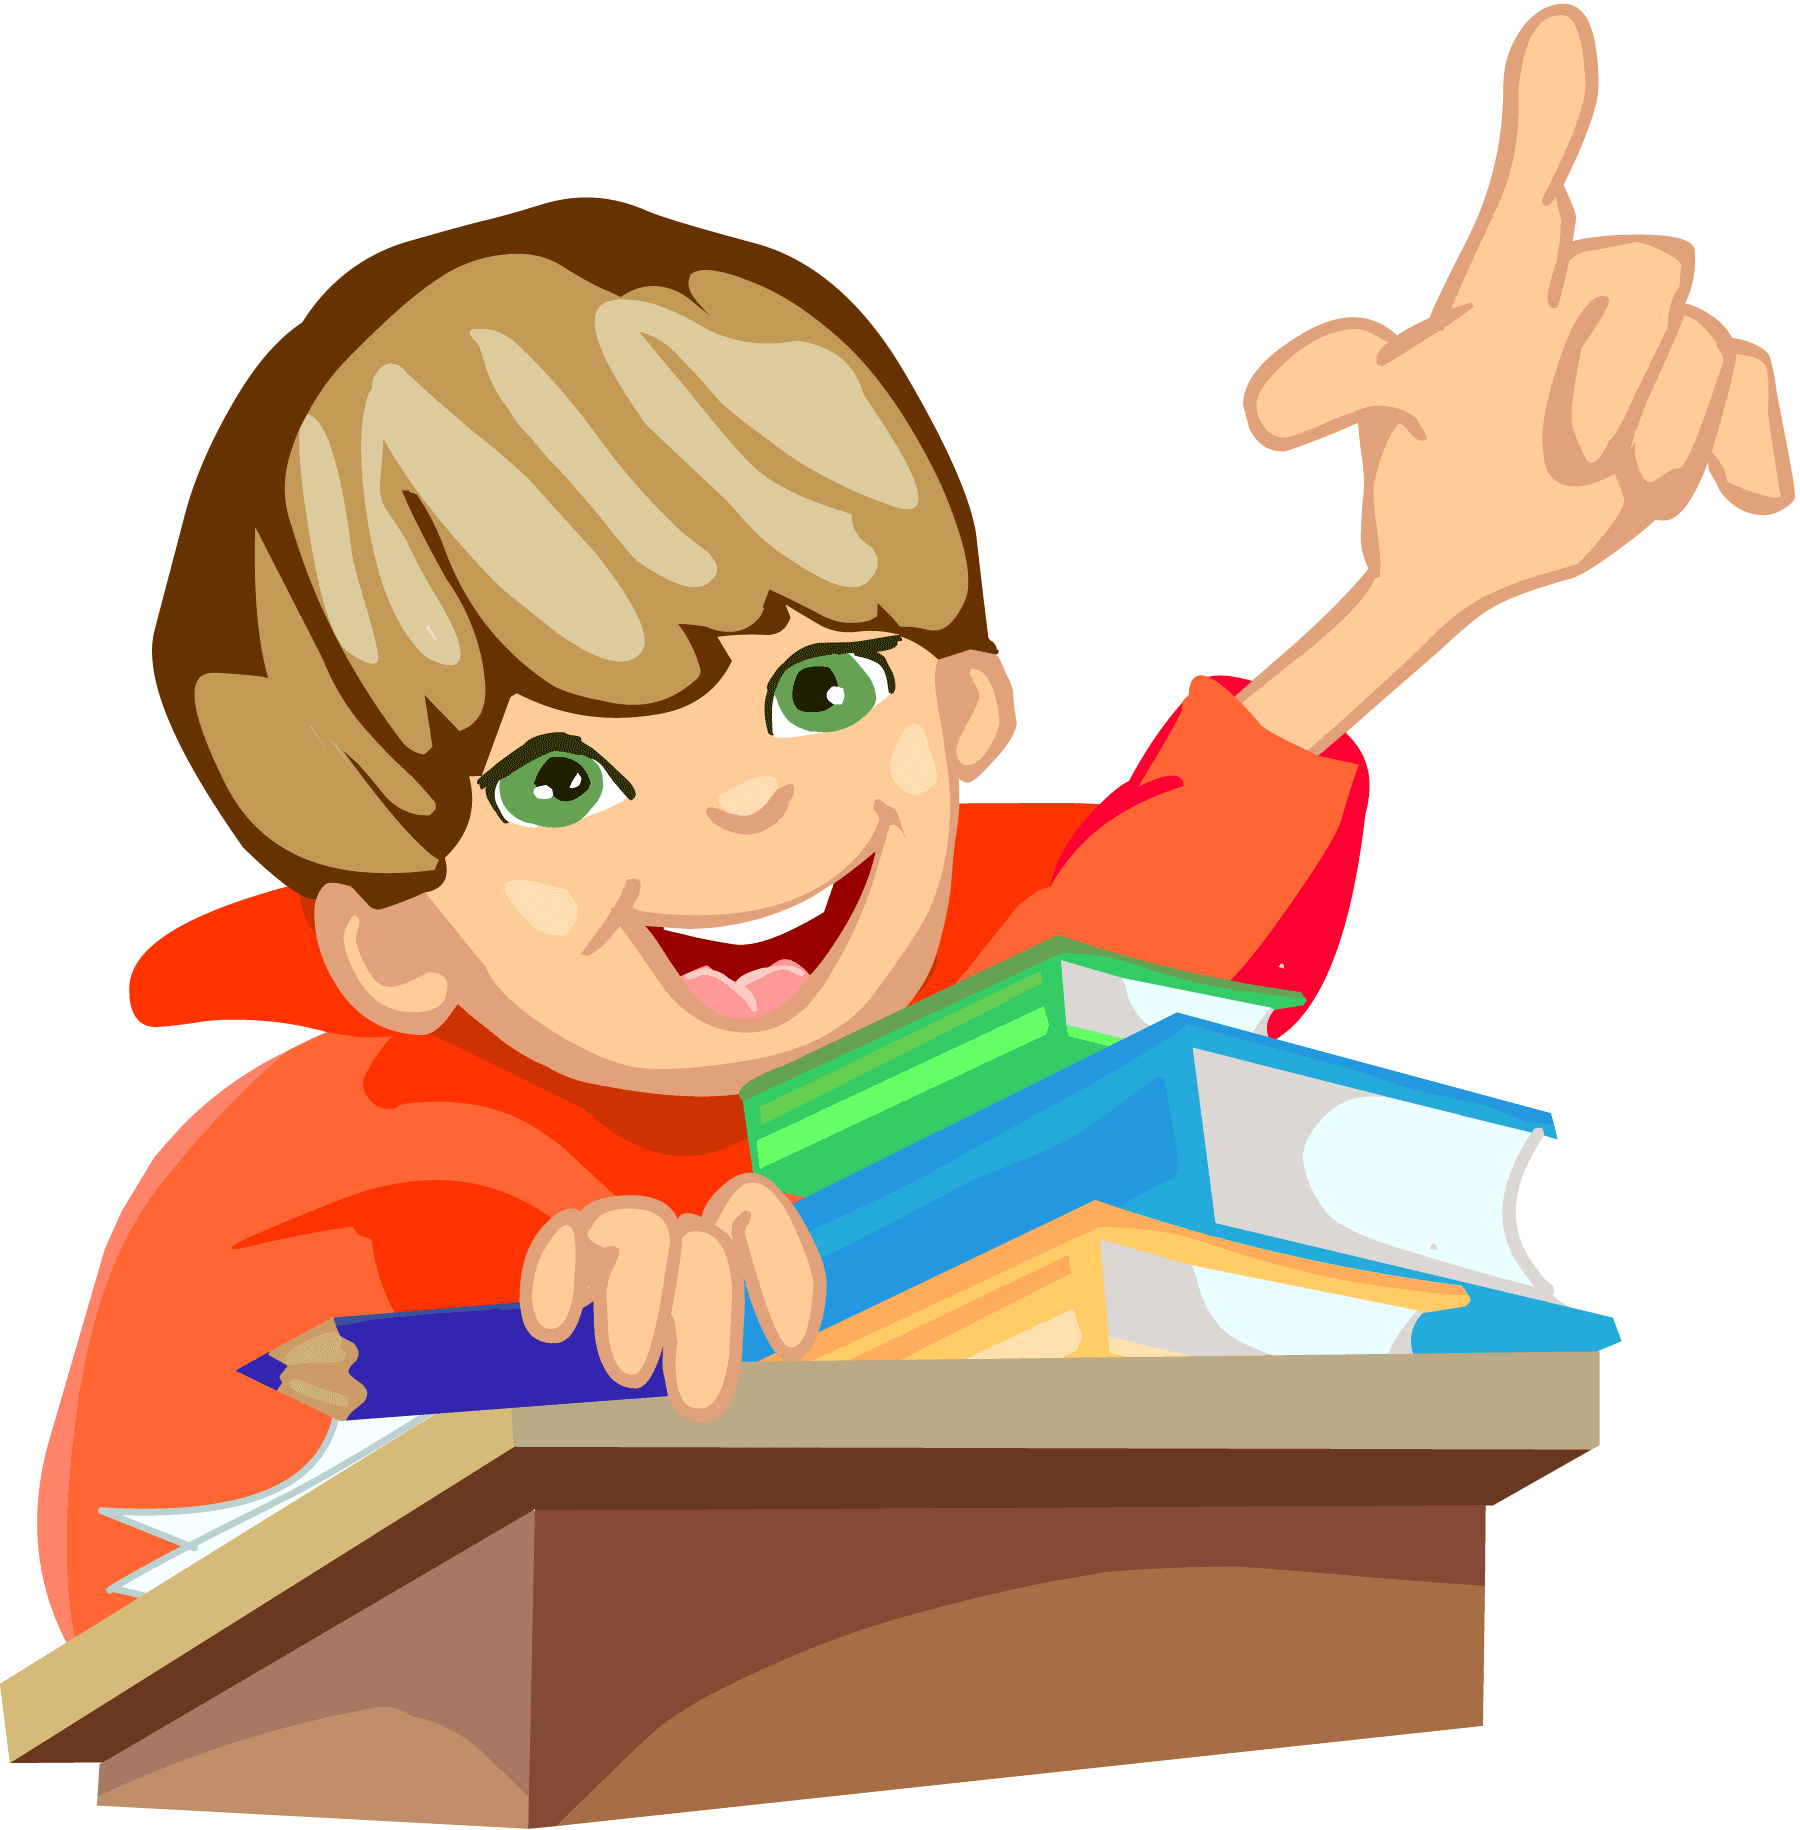 Clipart.ws: student raising | Clipart Panda - Free Clipart Images